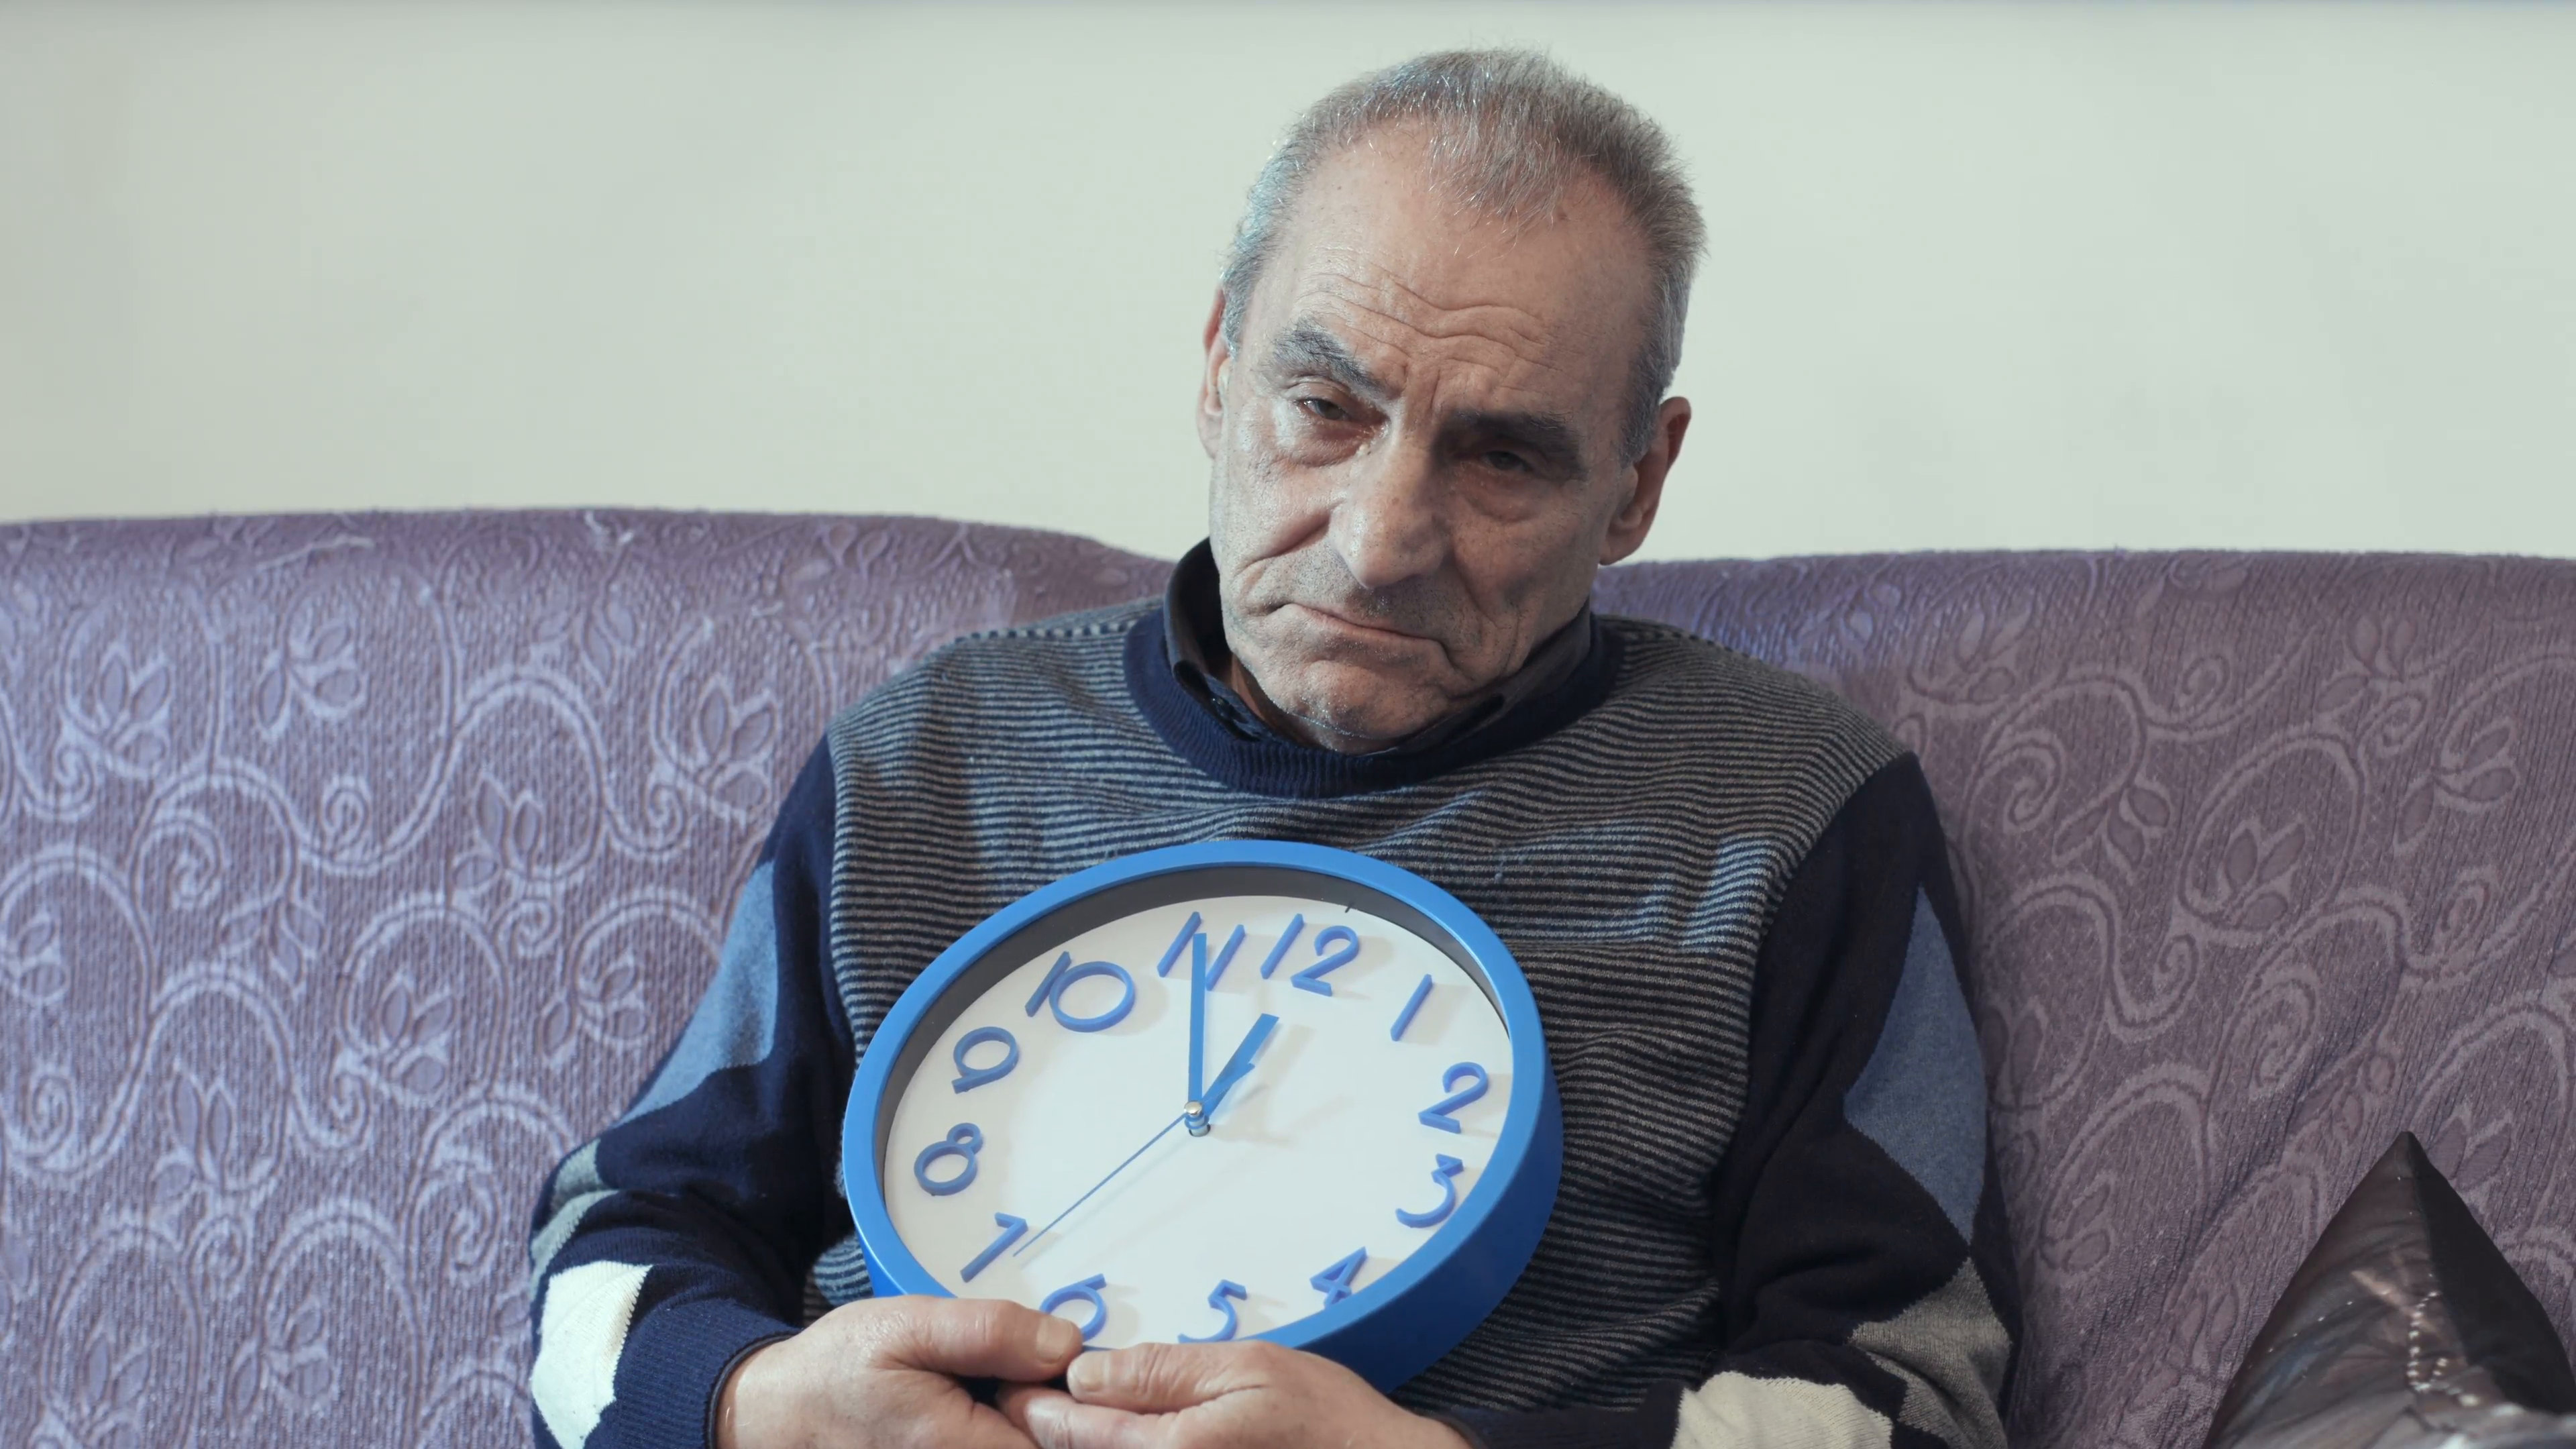 old man with a wall clock: time passing, time left, end of life ...